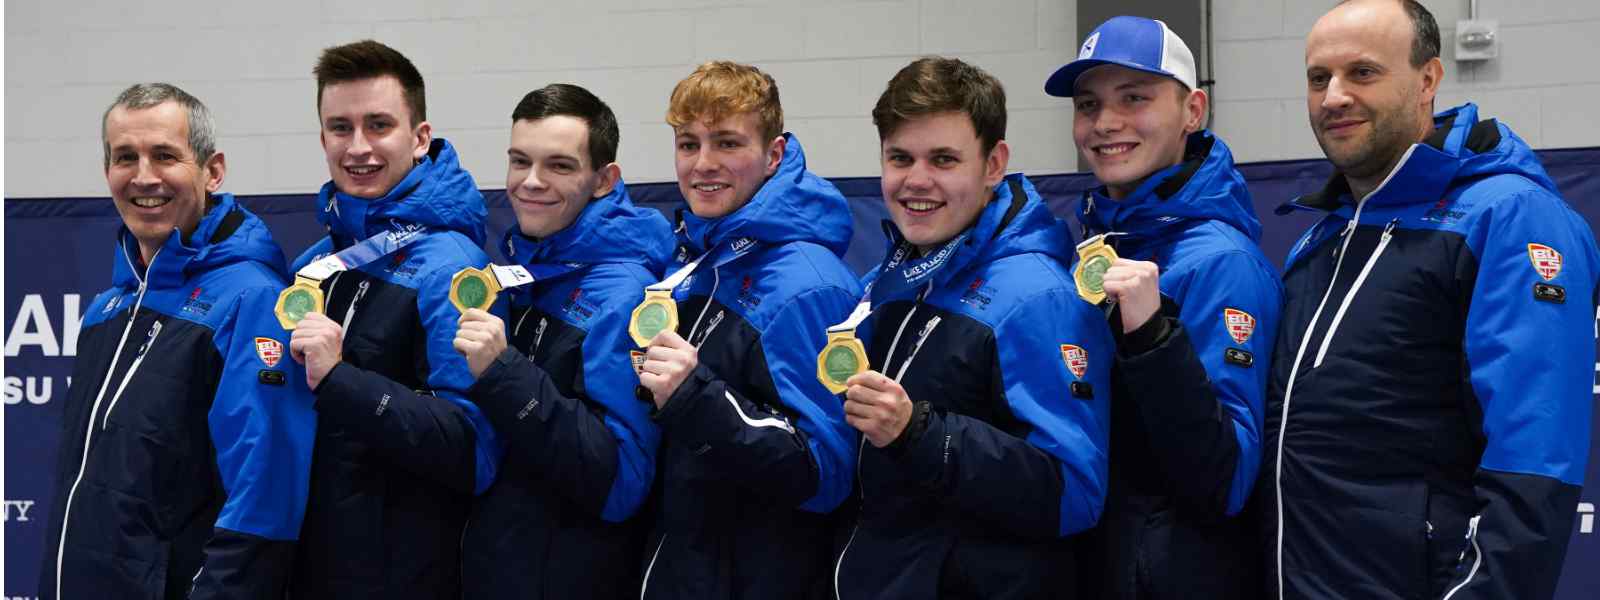 Blair Haswell (third right) with the gold medal-winning curling team at the World University Winter Games. Photo  FISU